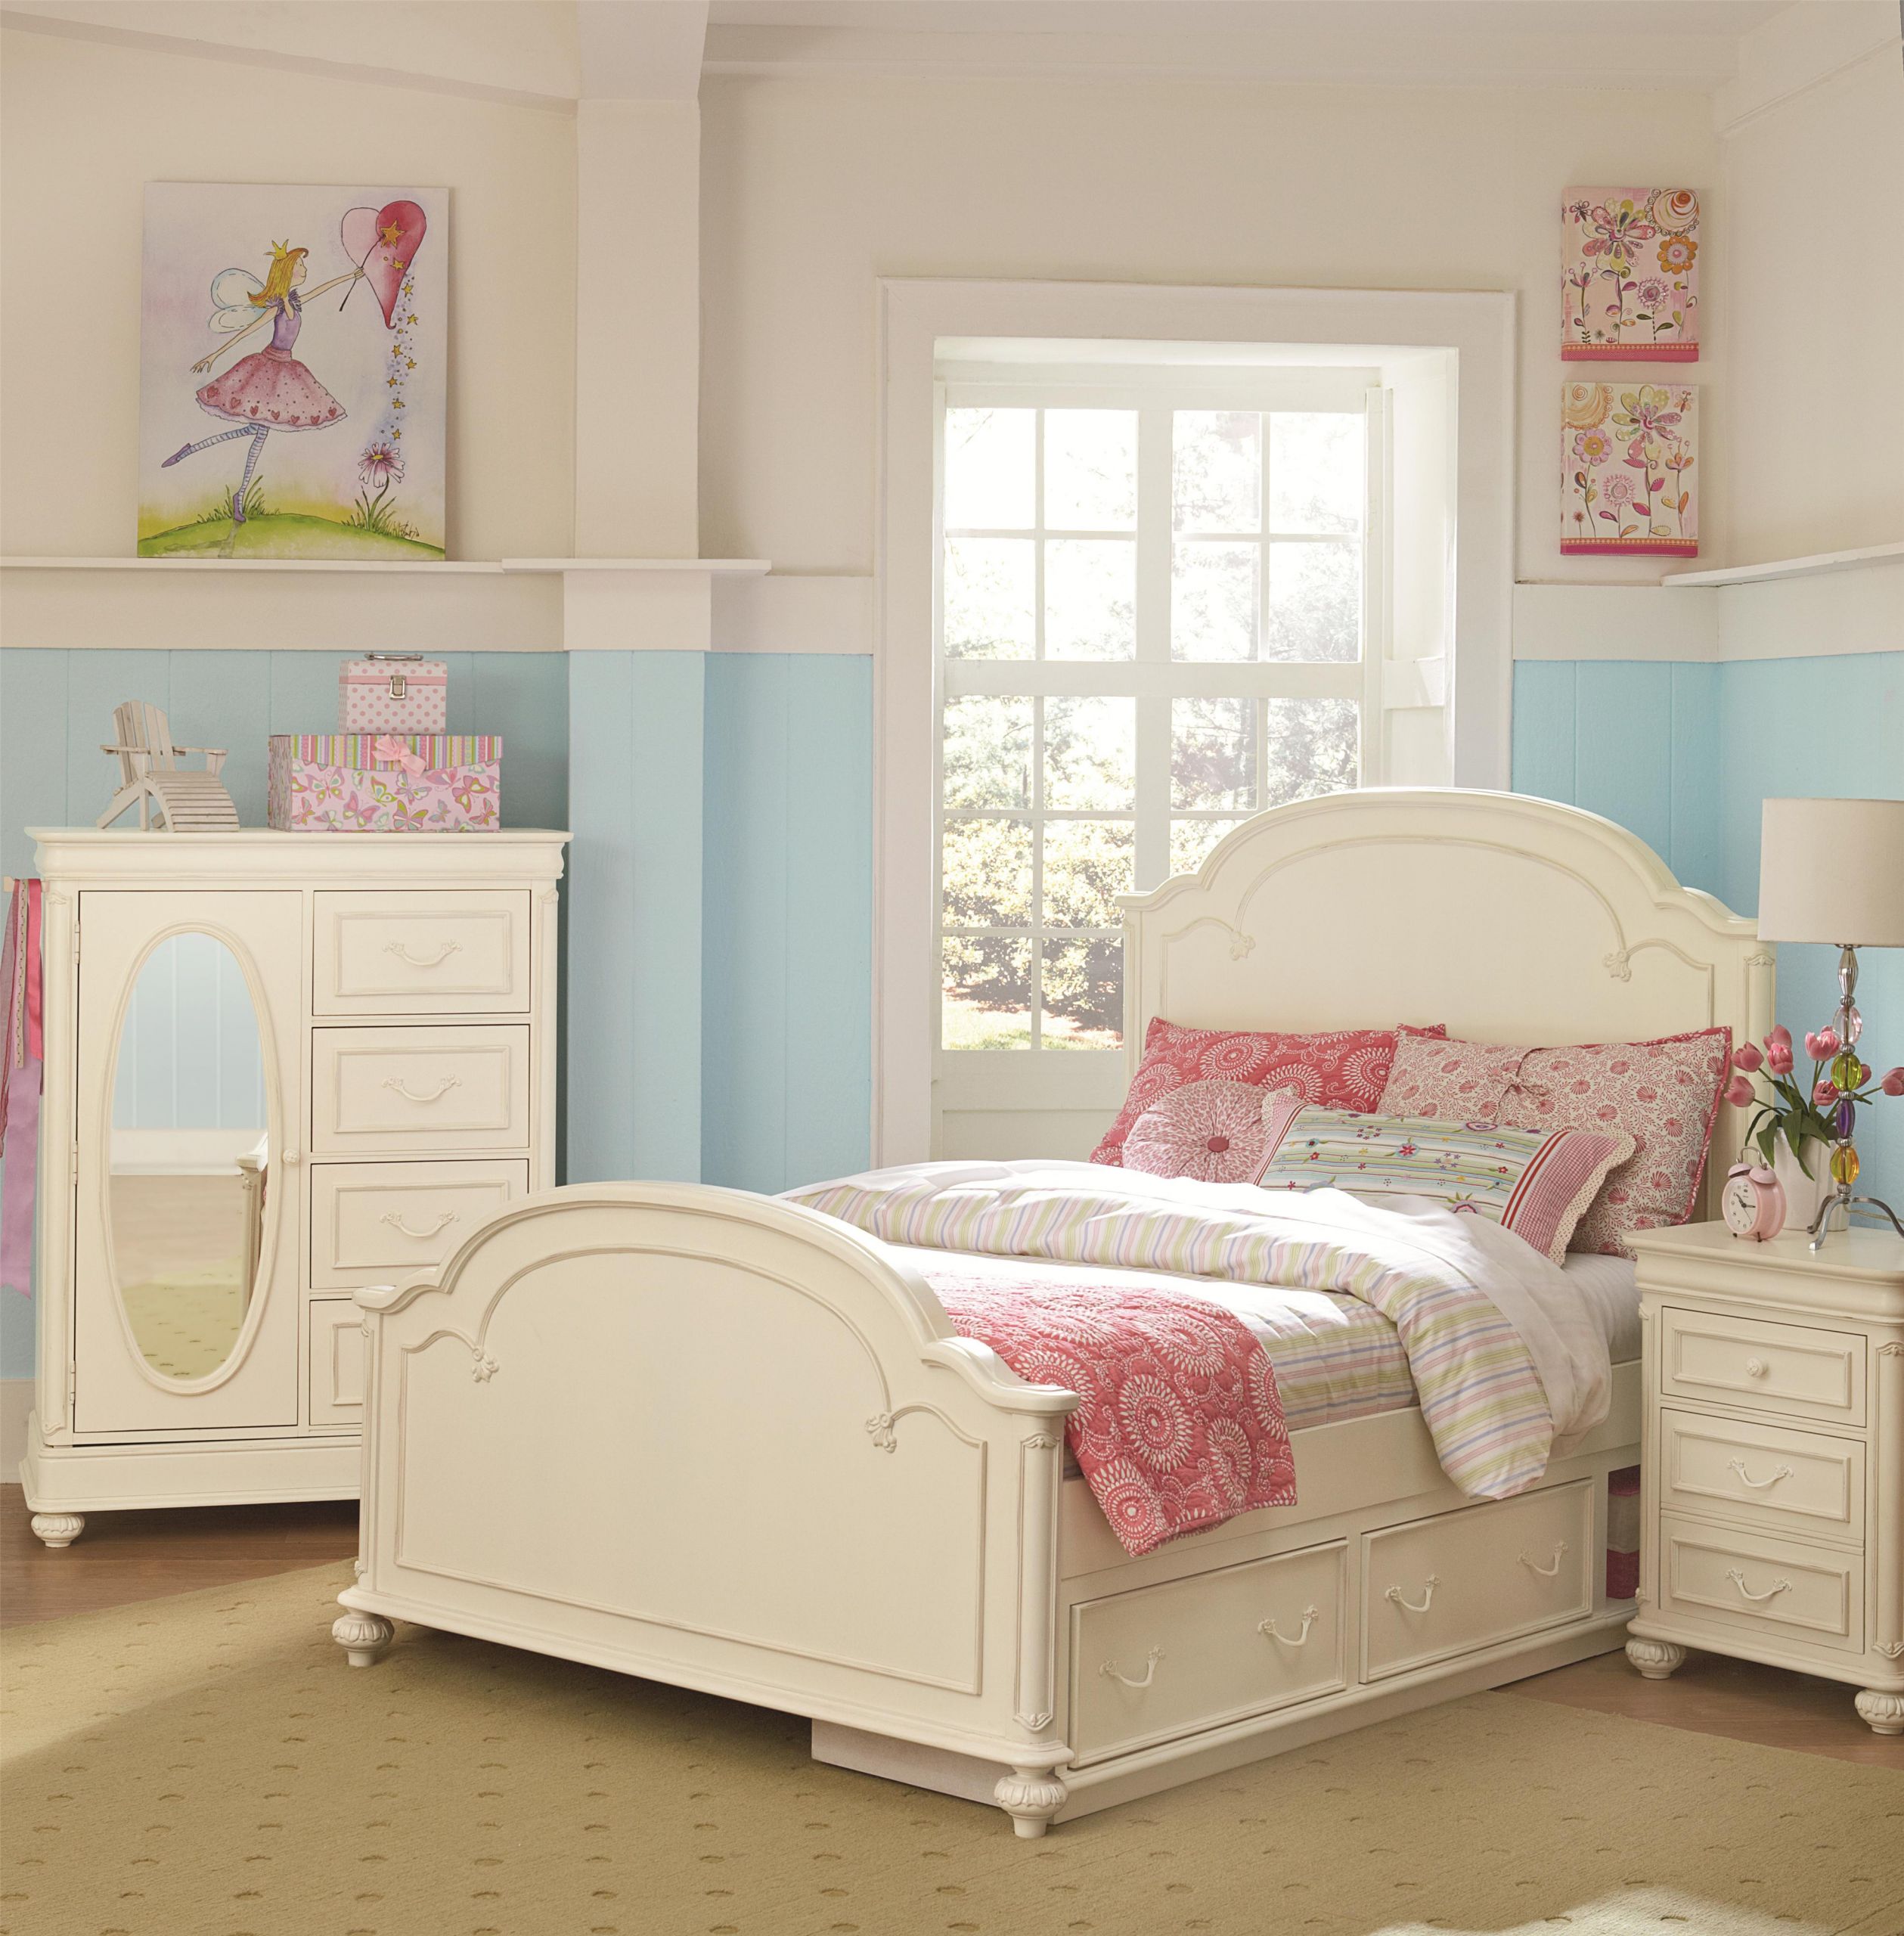 Kids Full Bedroom Sets
 Legacy Classic Kids Charlotte Full Arched Panel Bed